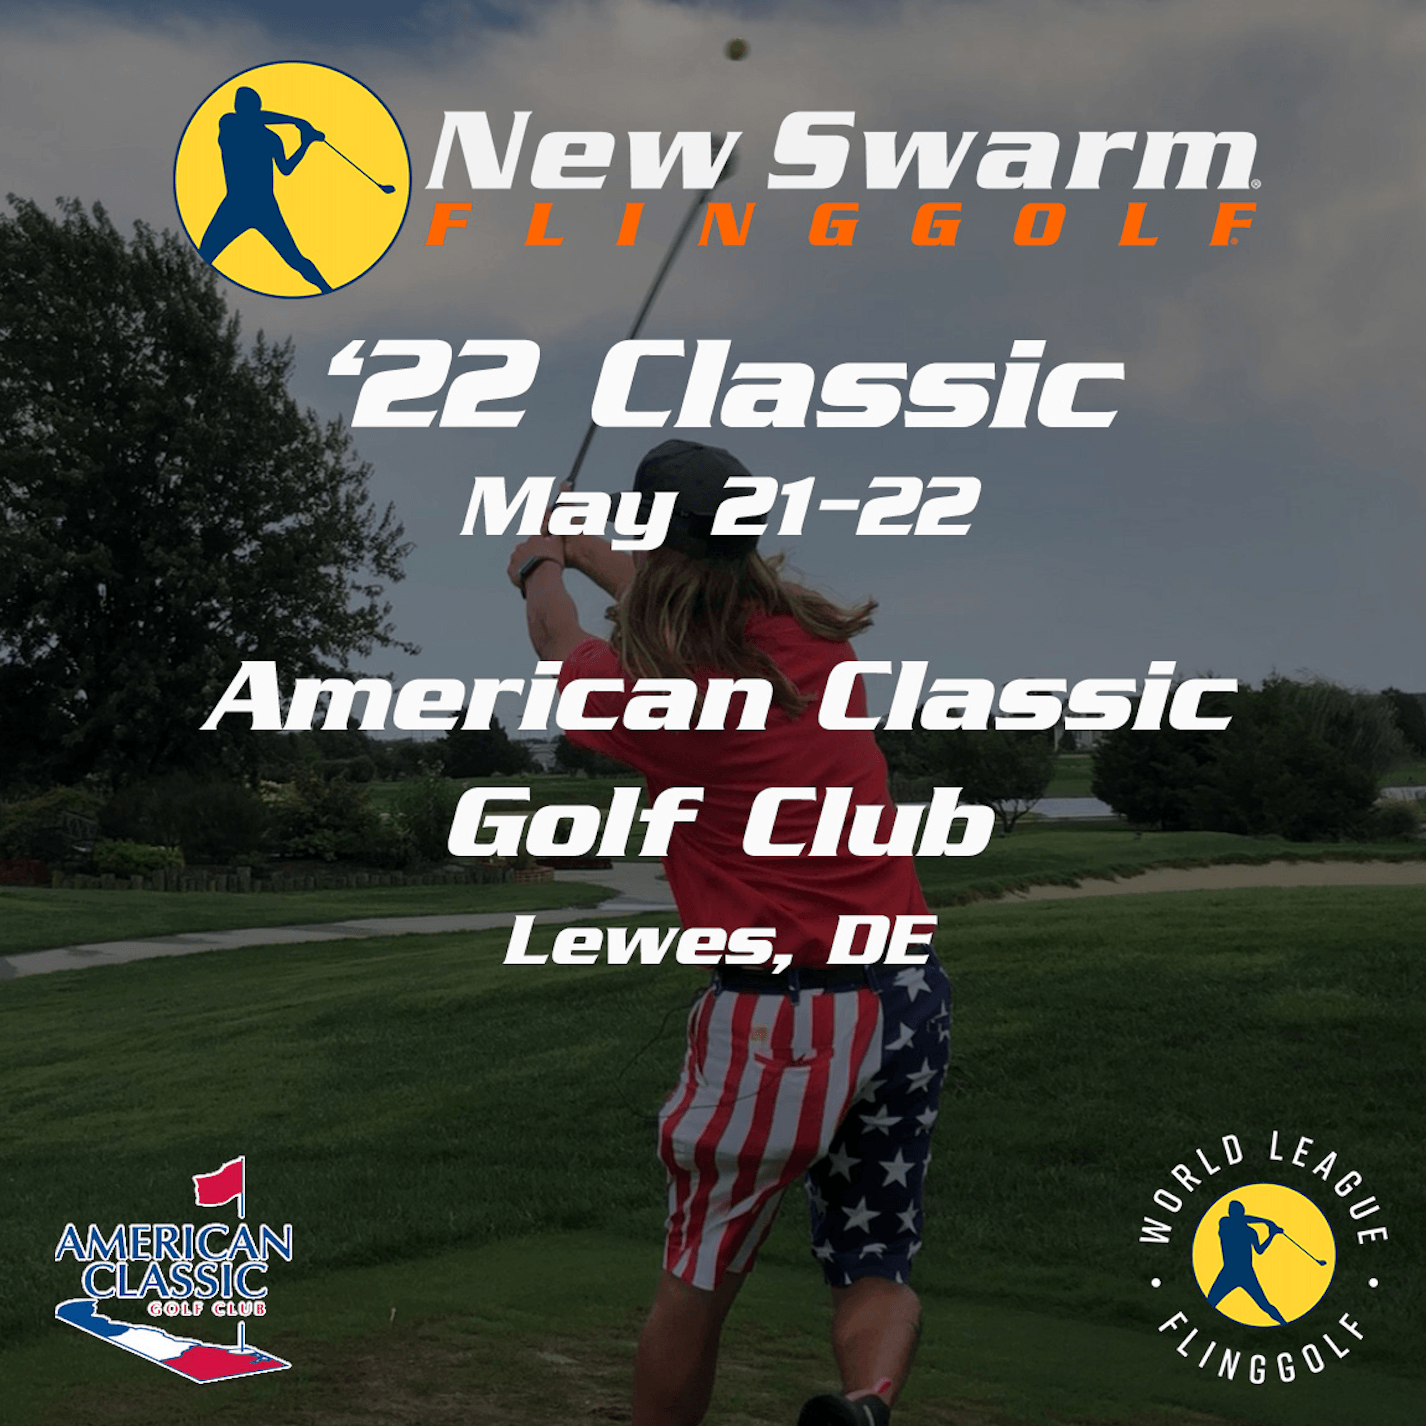 Registration is OPEN for the New Swarm FlingGolf Classic